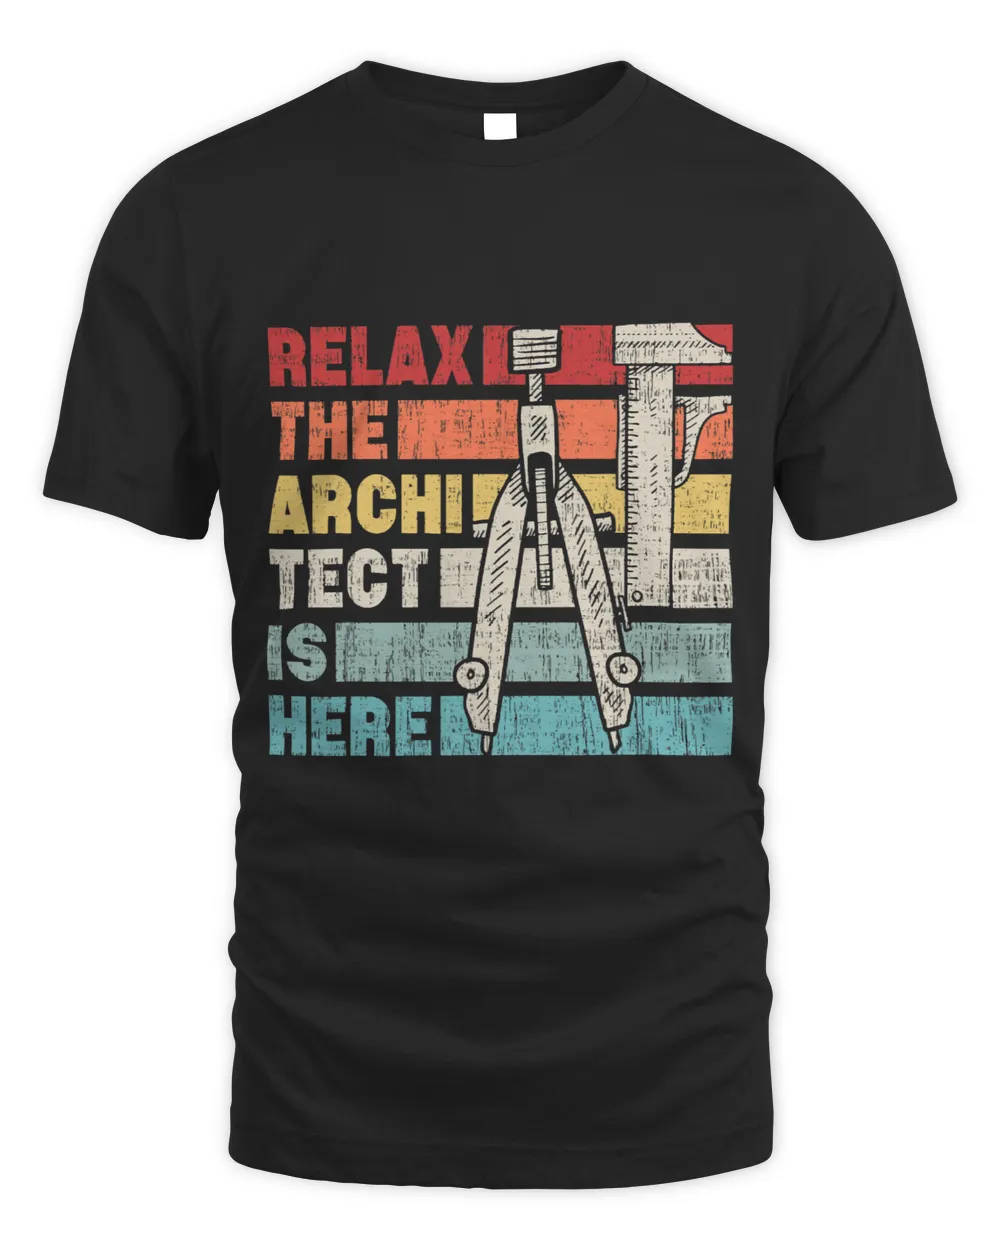 Relax The Architect For Civil Engineers Architects